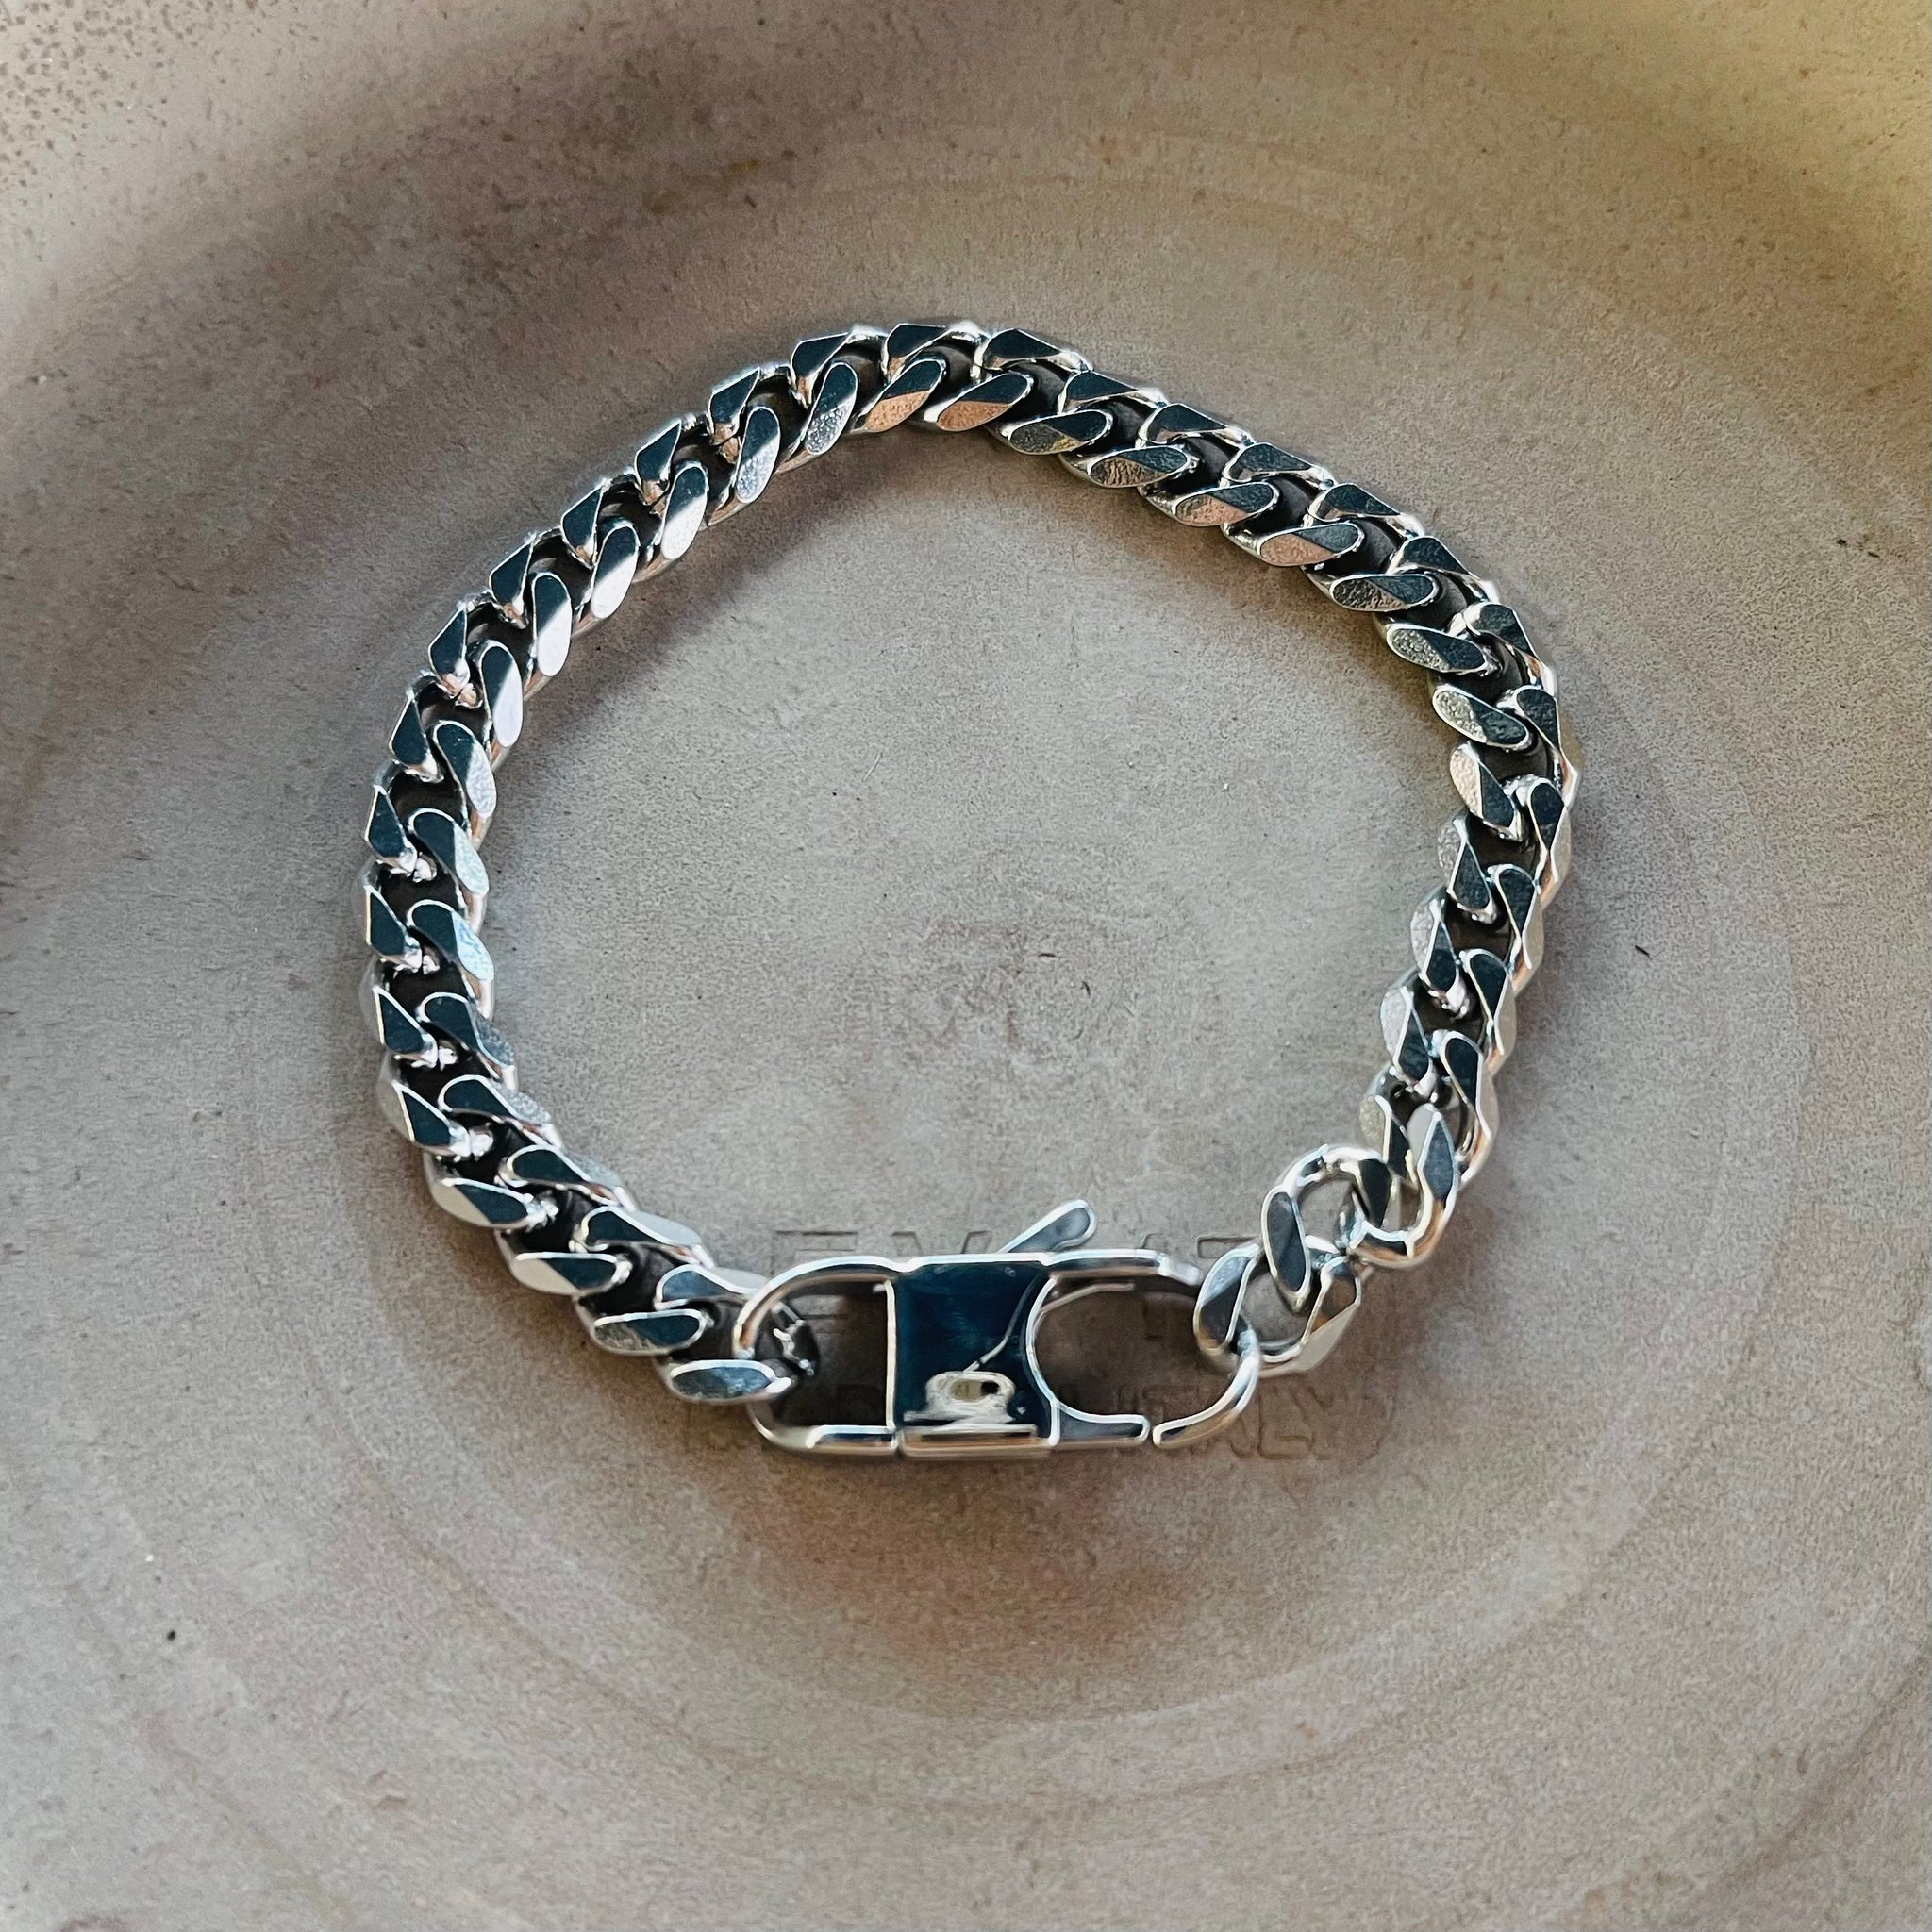 Chain Bracelet with Big Clasp - Silver